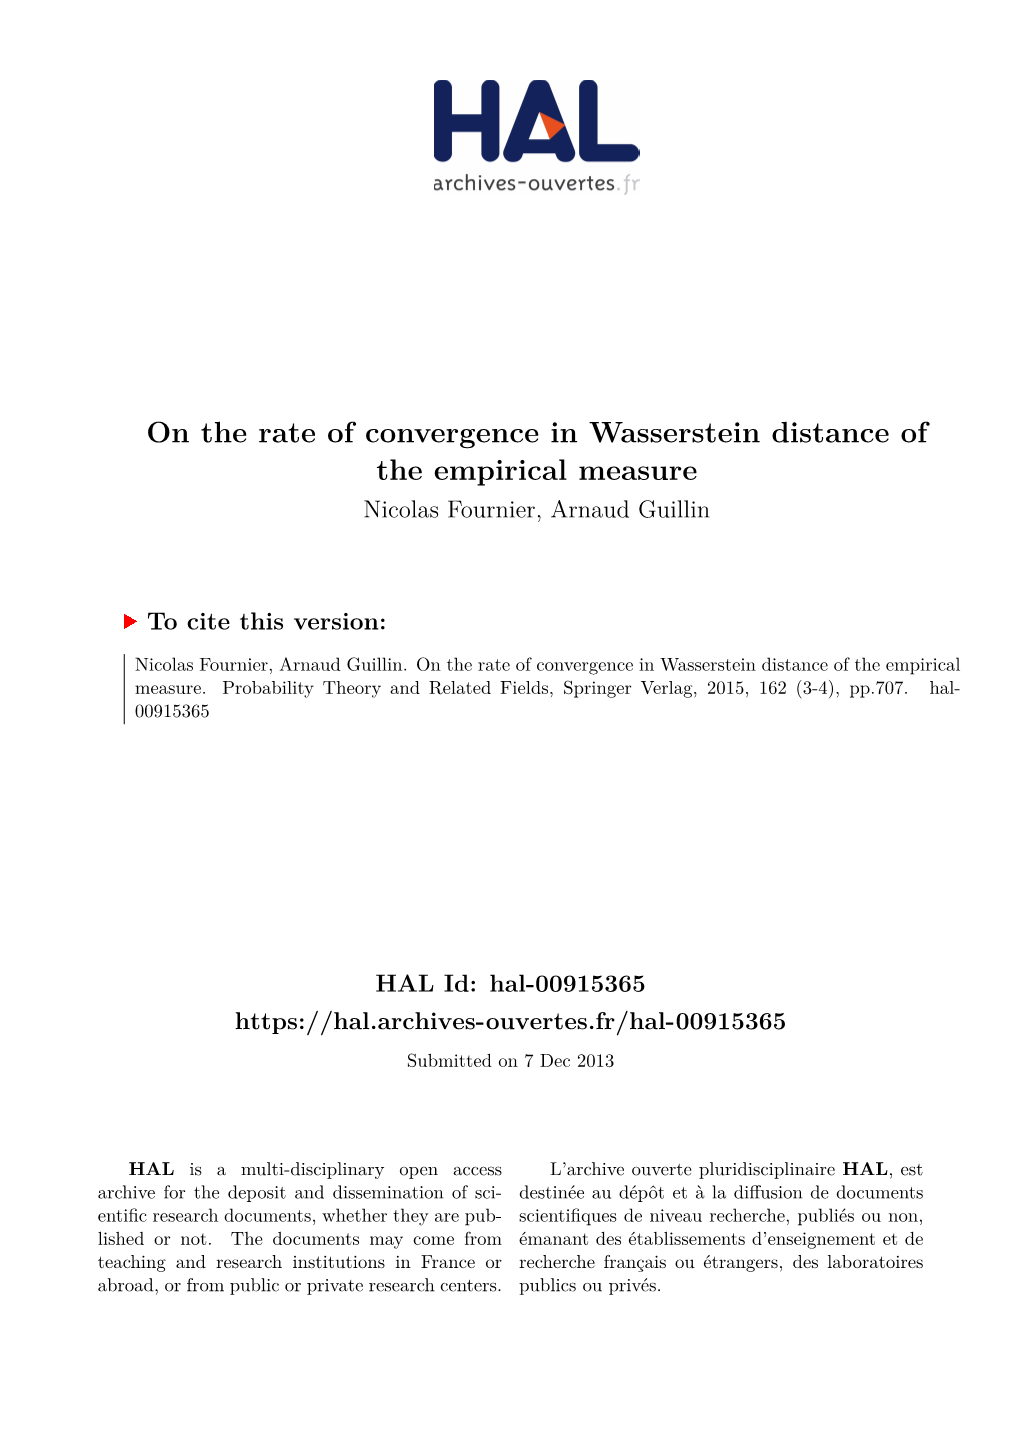 On the Rate of Convergence in Wasserstein Distance of the Empirical Measure Nicolas Fournier, Arnaud Guillin